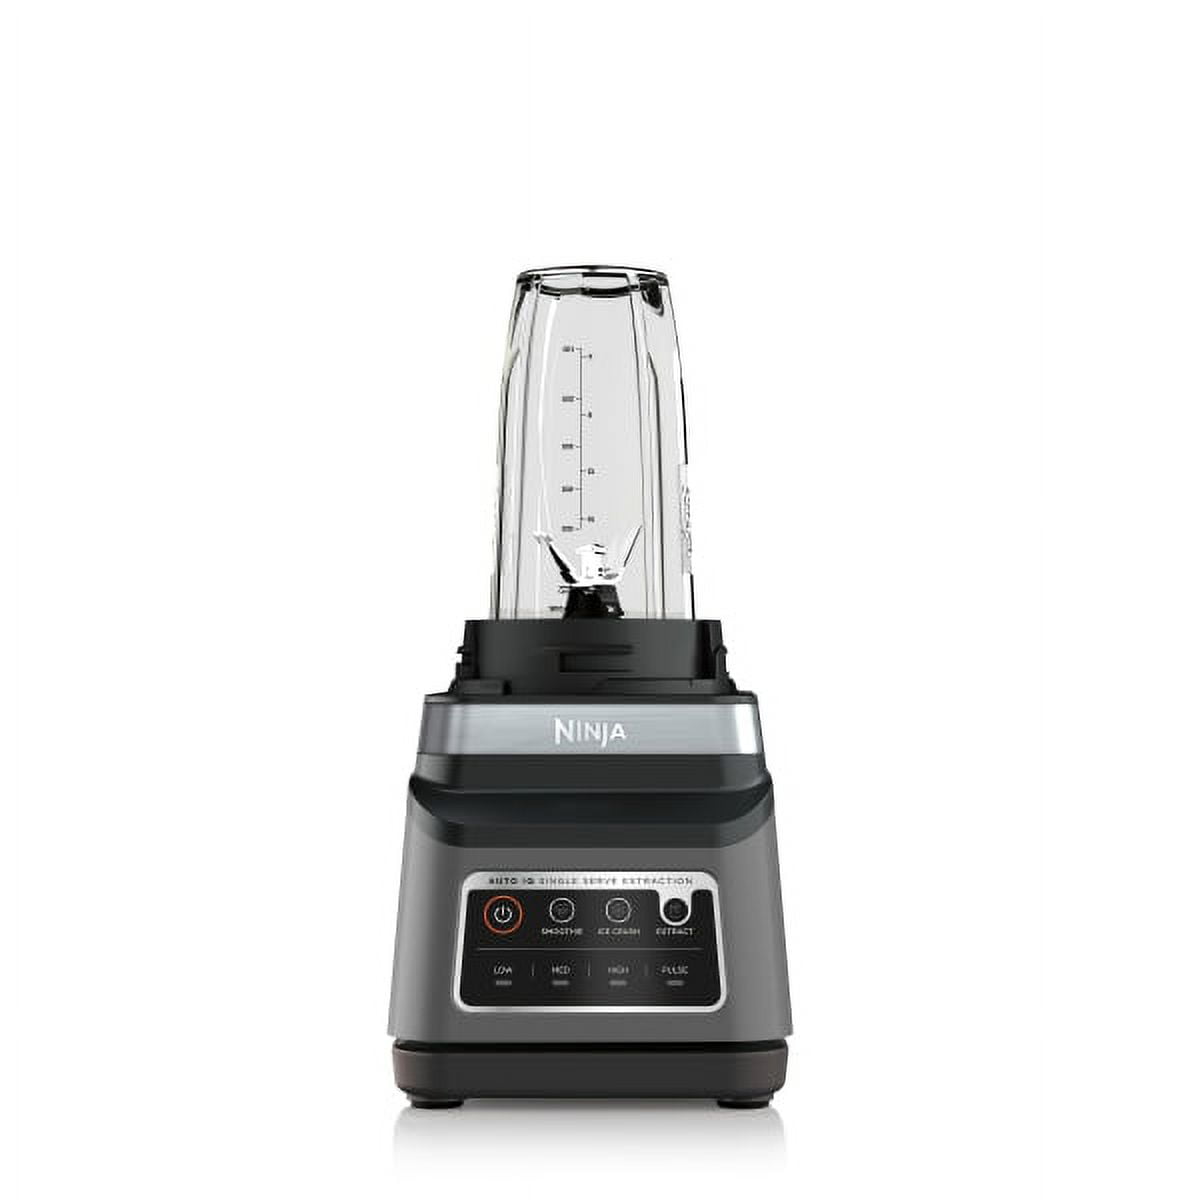 Ninja BN701 Professional Plus Blender Duo with Auto iq Review 2021 